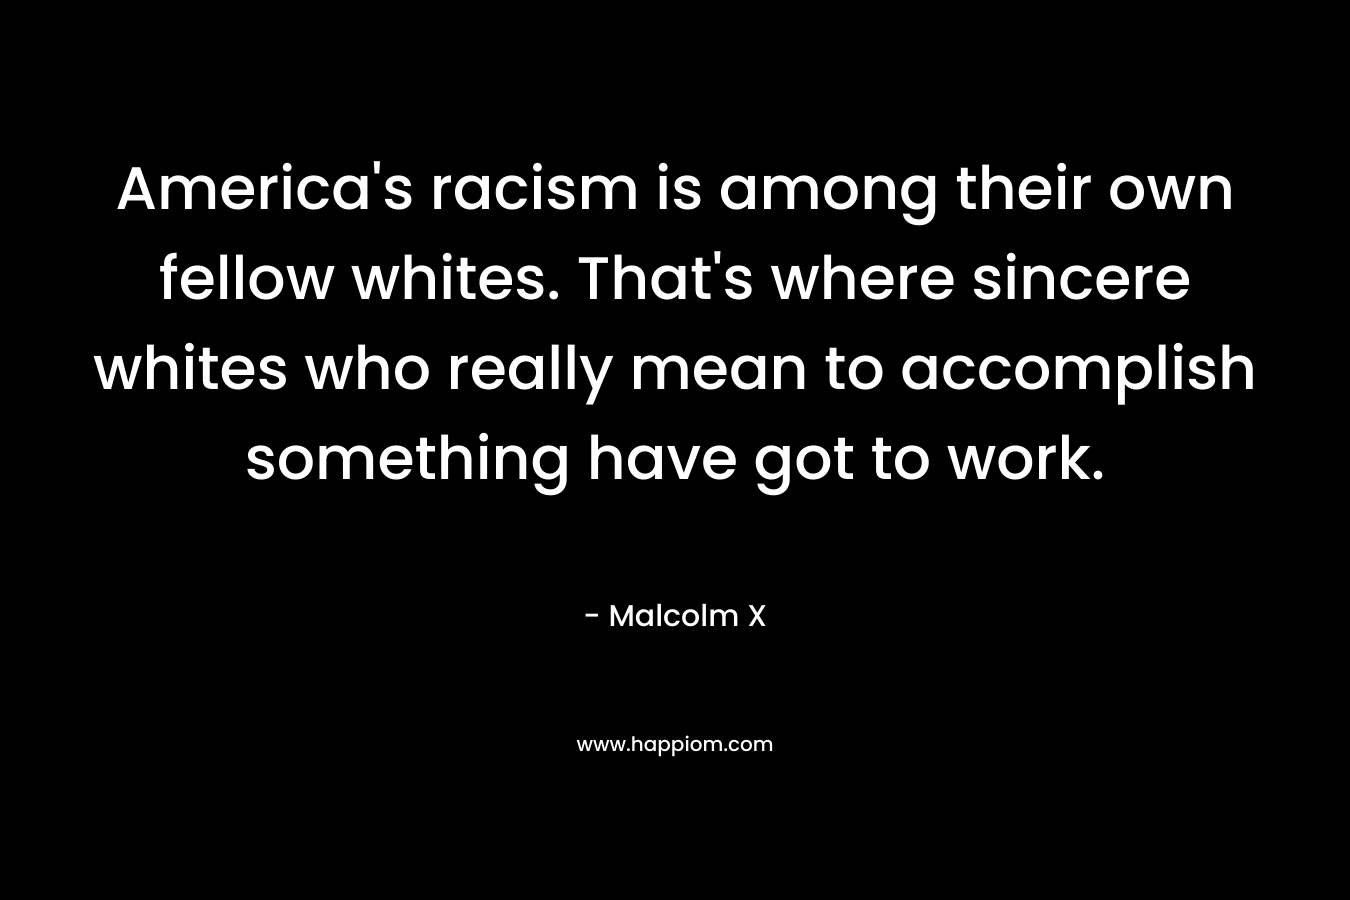 America's racism is among their own fellow whites. That's where sincere whites who really mean to accomplish something have got to work.